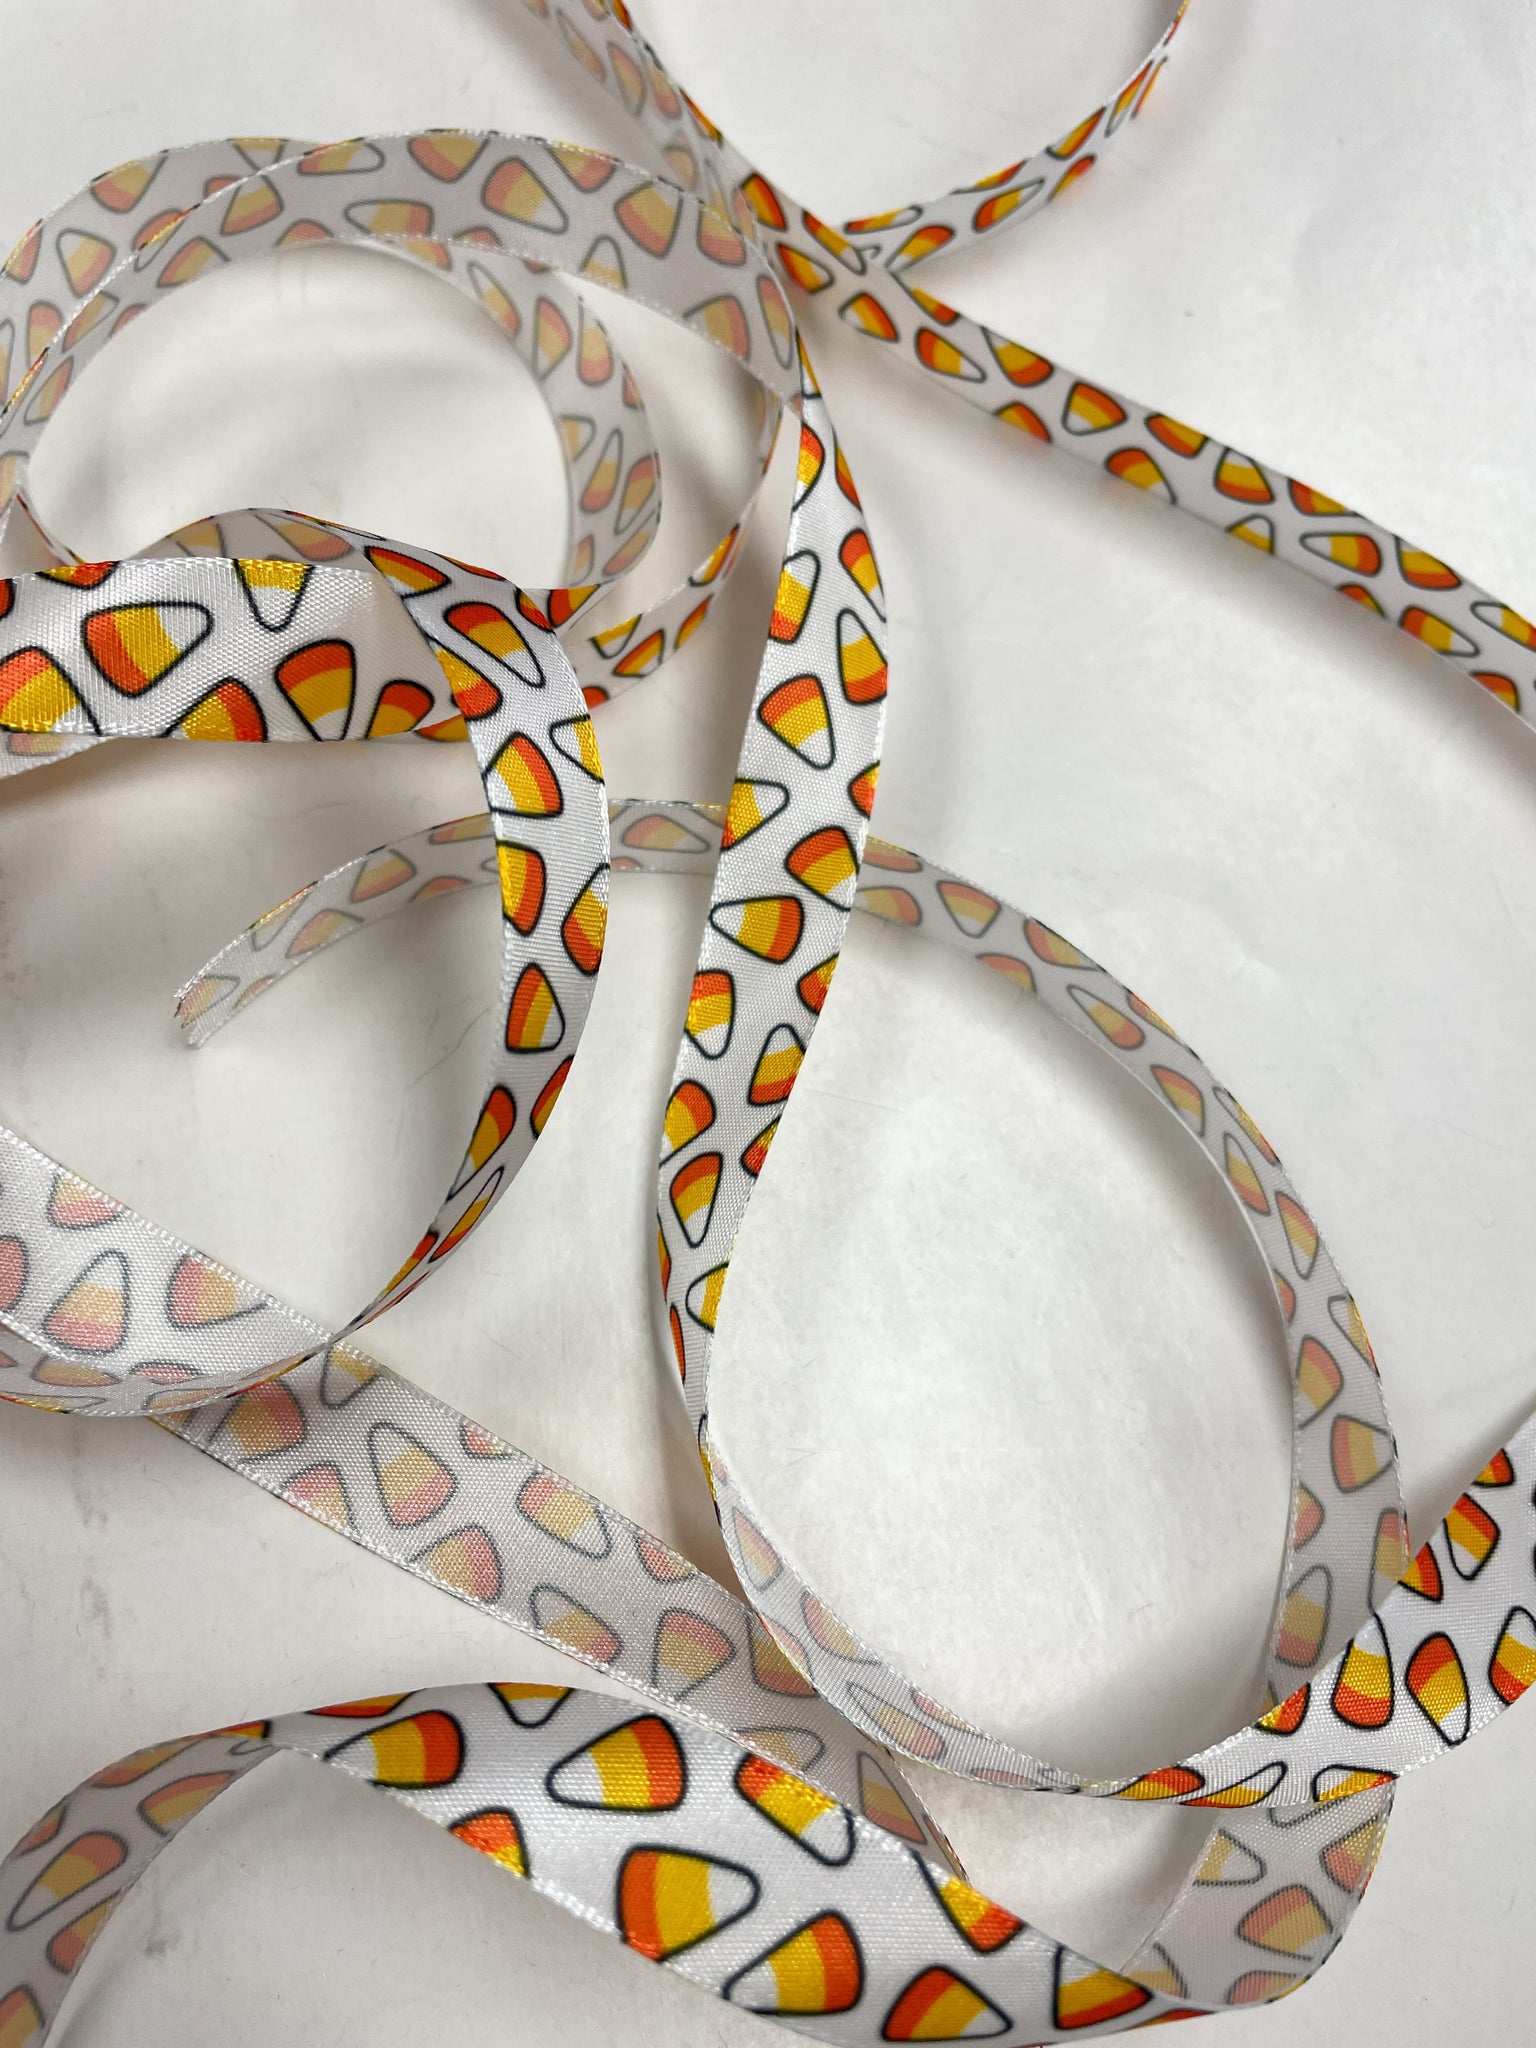 3 YD Polyester Printed Taffeta Ribbon - White with Candy Corn